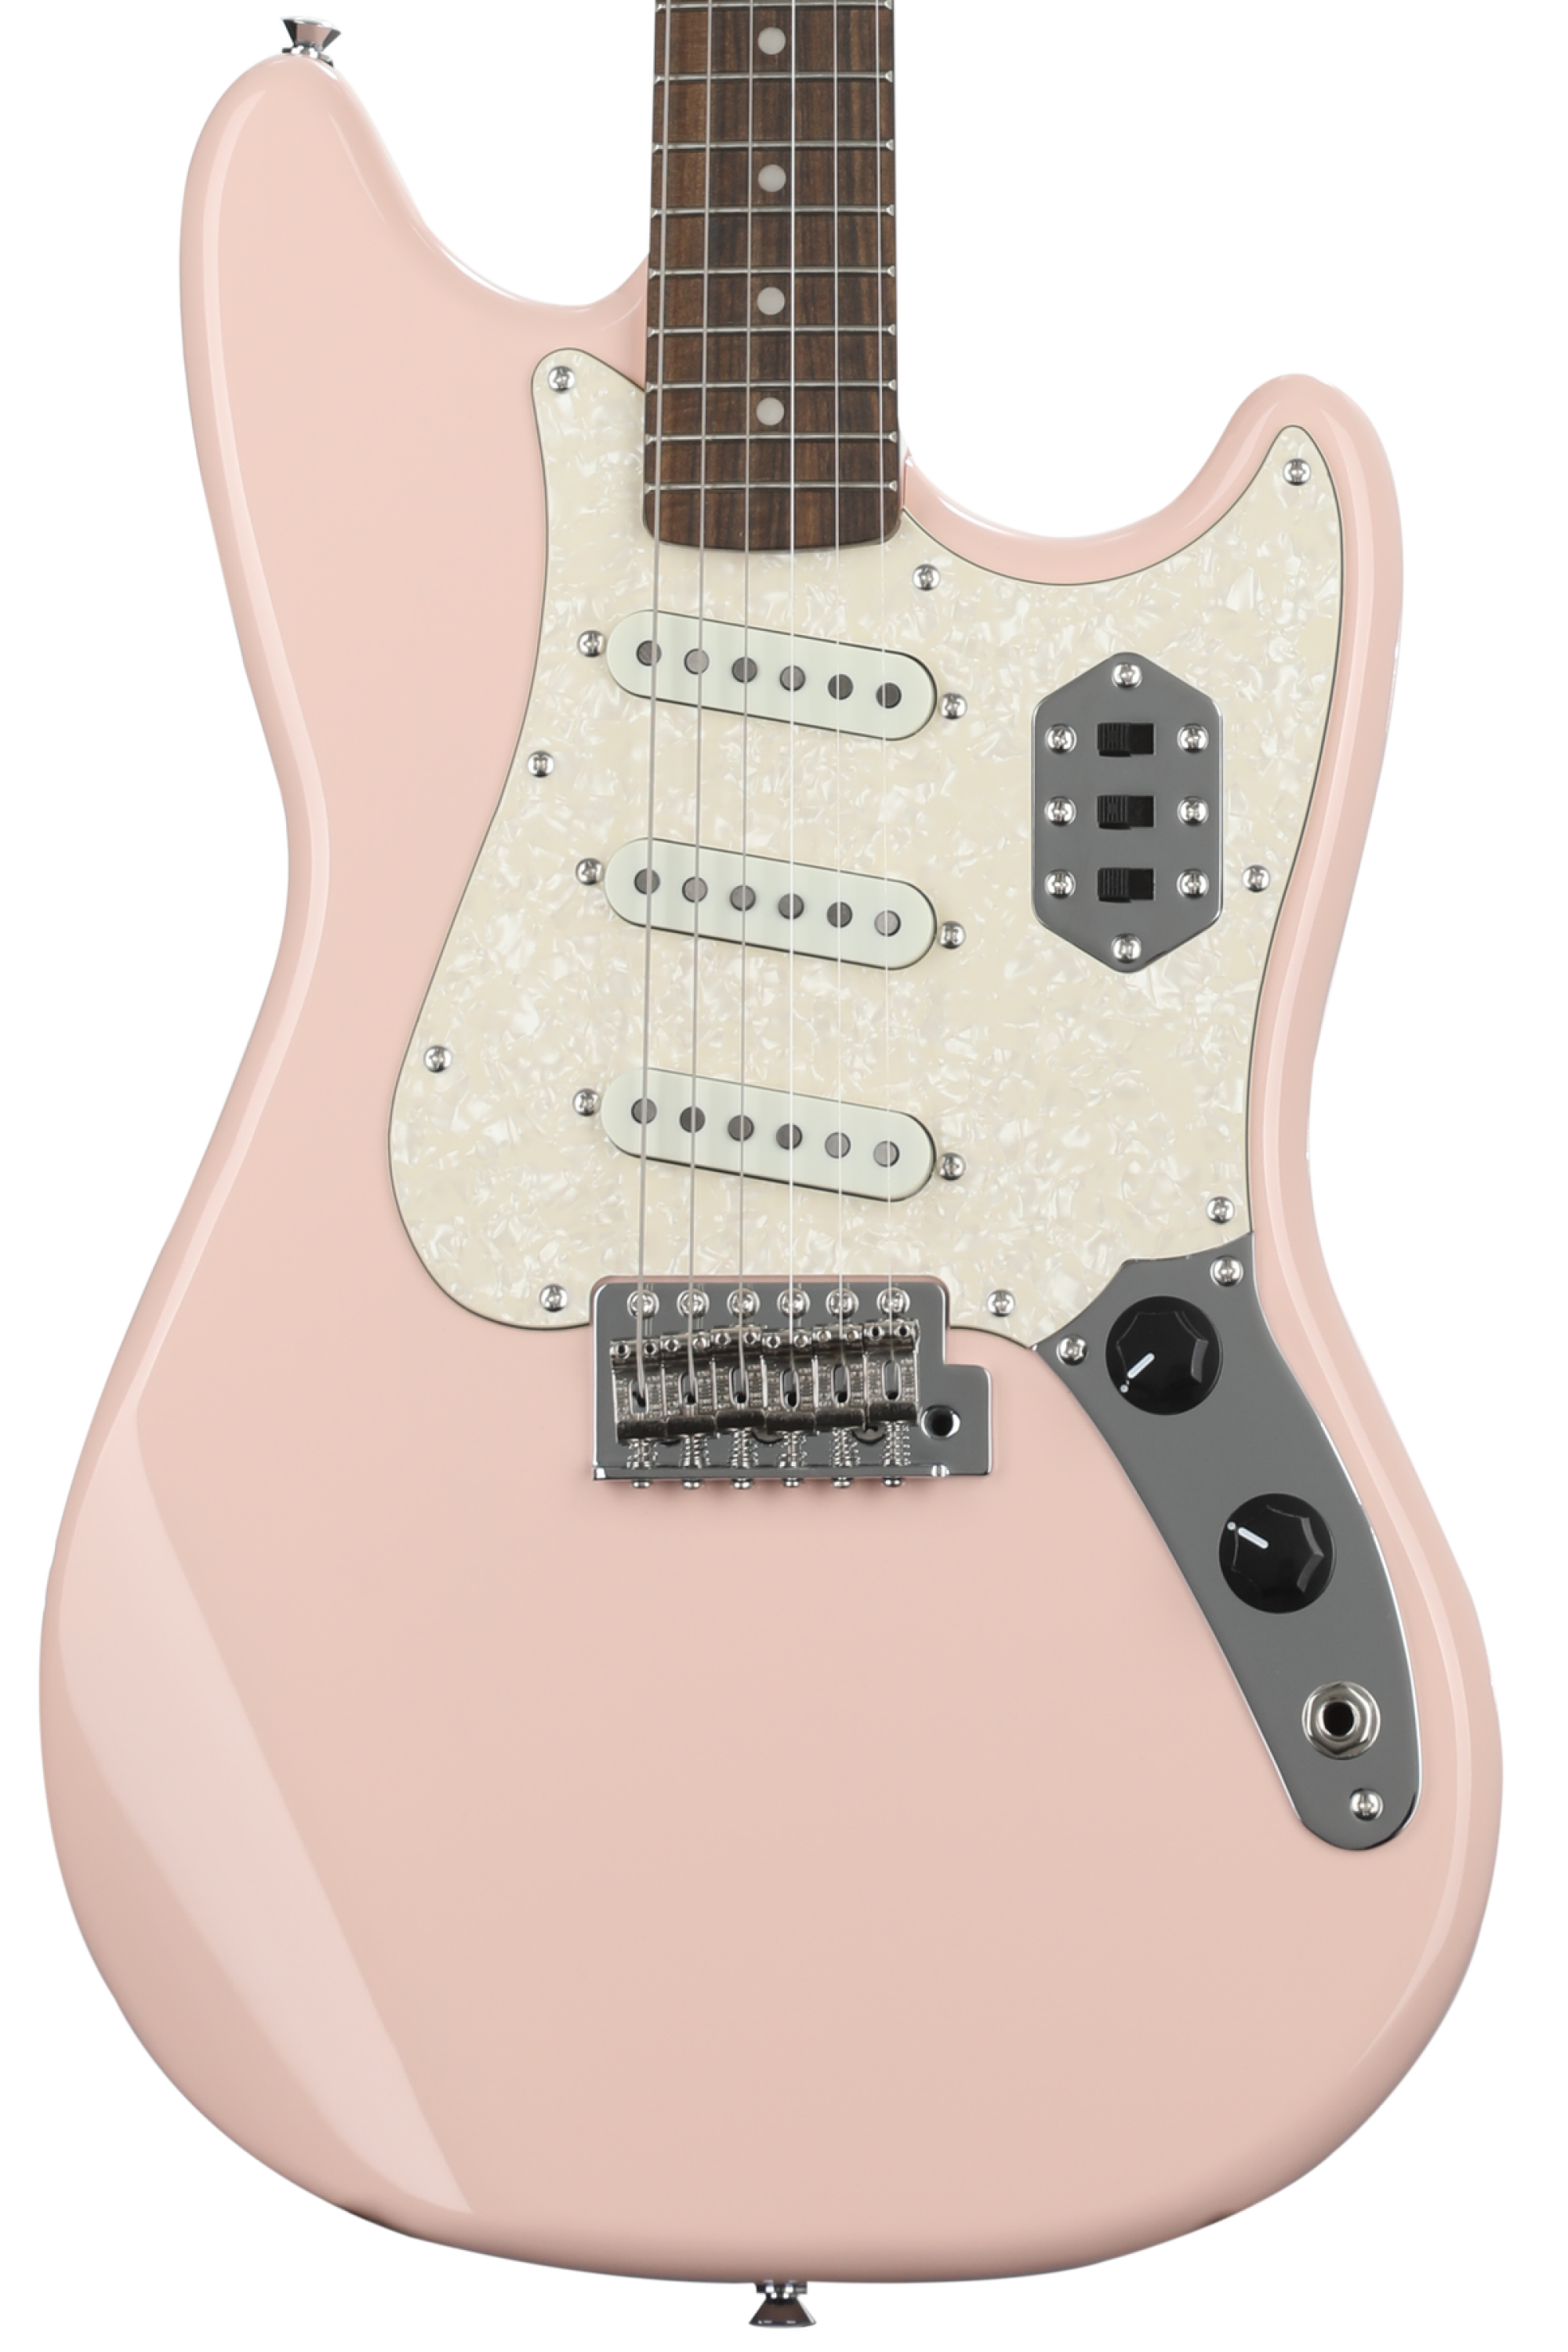 Squier Paranormal Cyclone Electric Guitar - Shell Pink